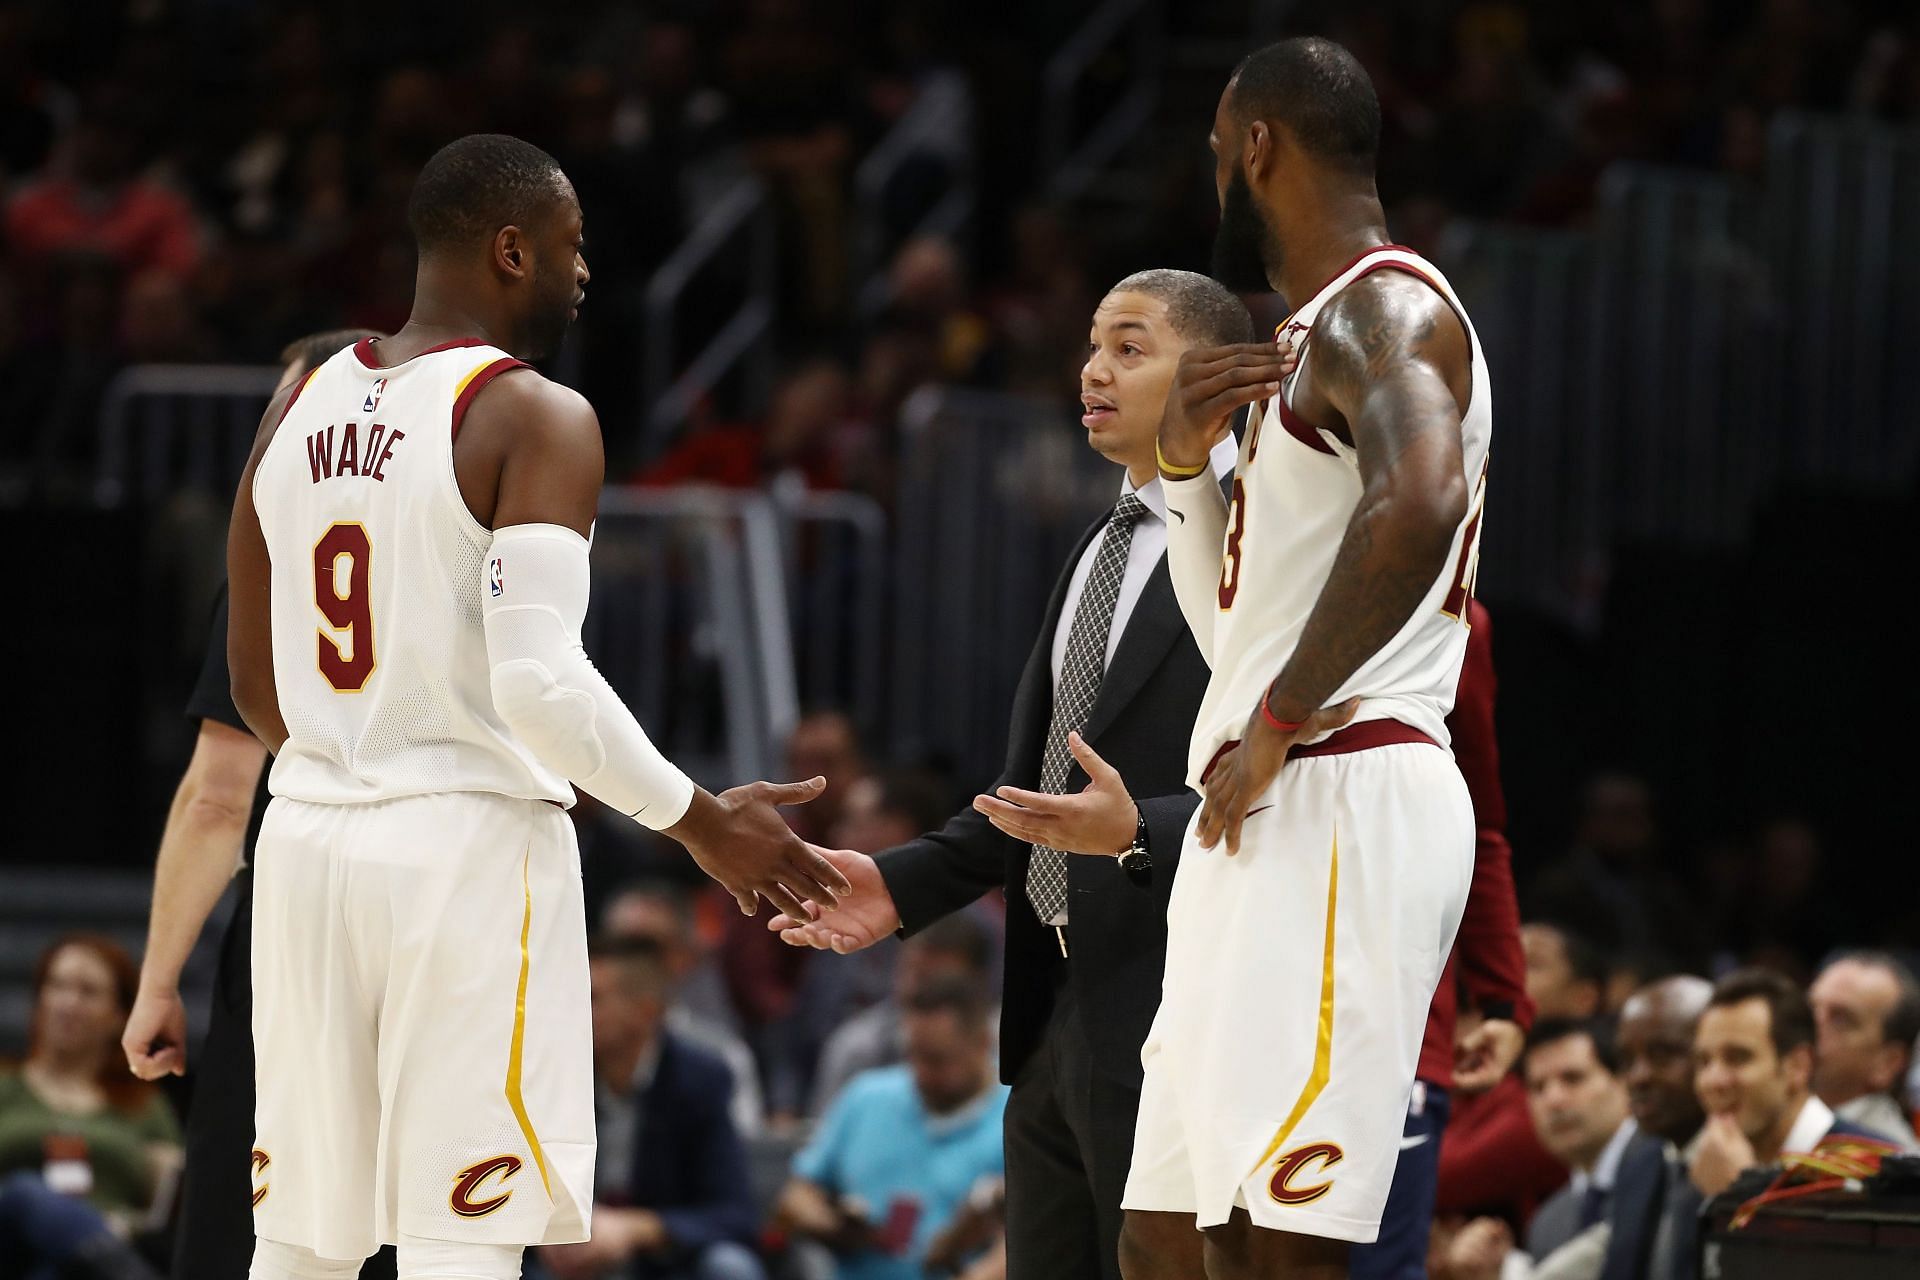 Tyronn Lue talking to Dwyane Wade (left) and LeBron James (right).